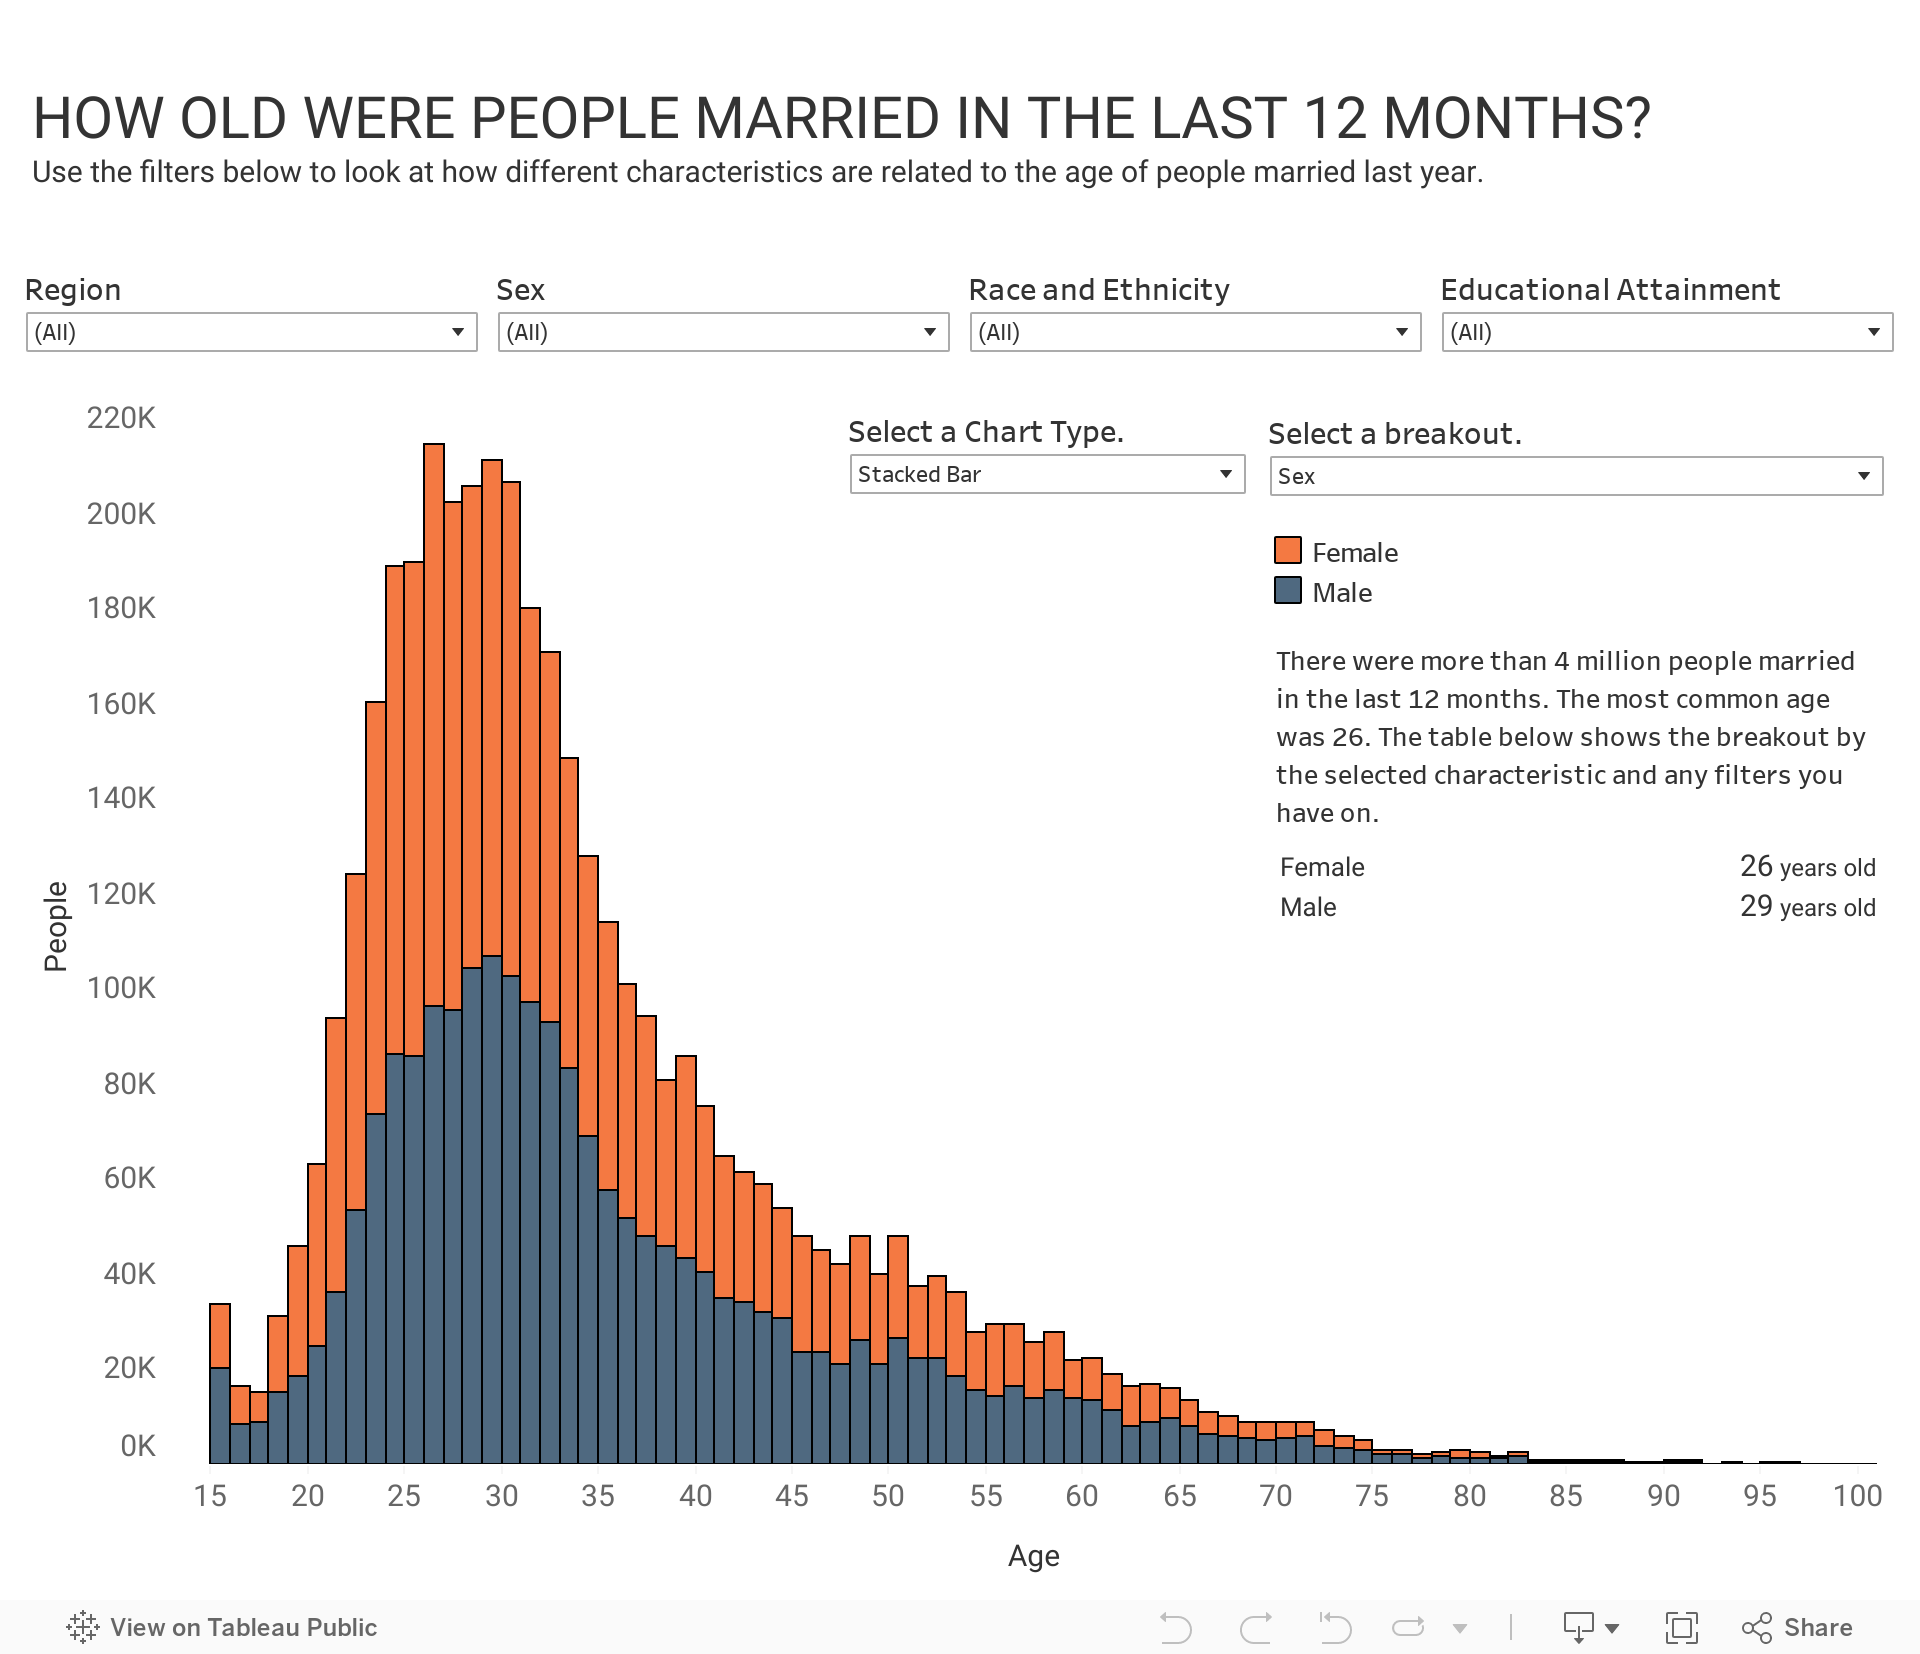 HOW OLD WERE PEOPLE MARRIED IN THE LAST 12 MONTHS? 